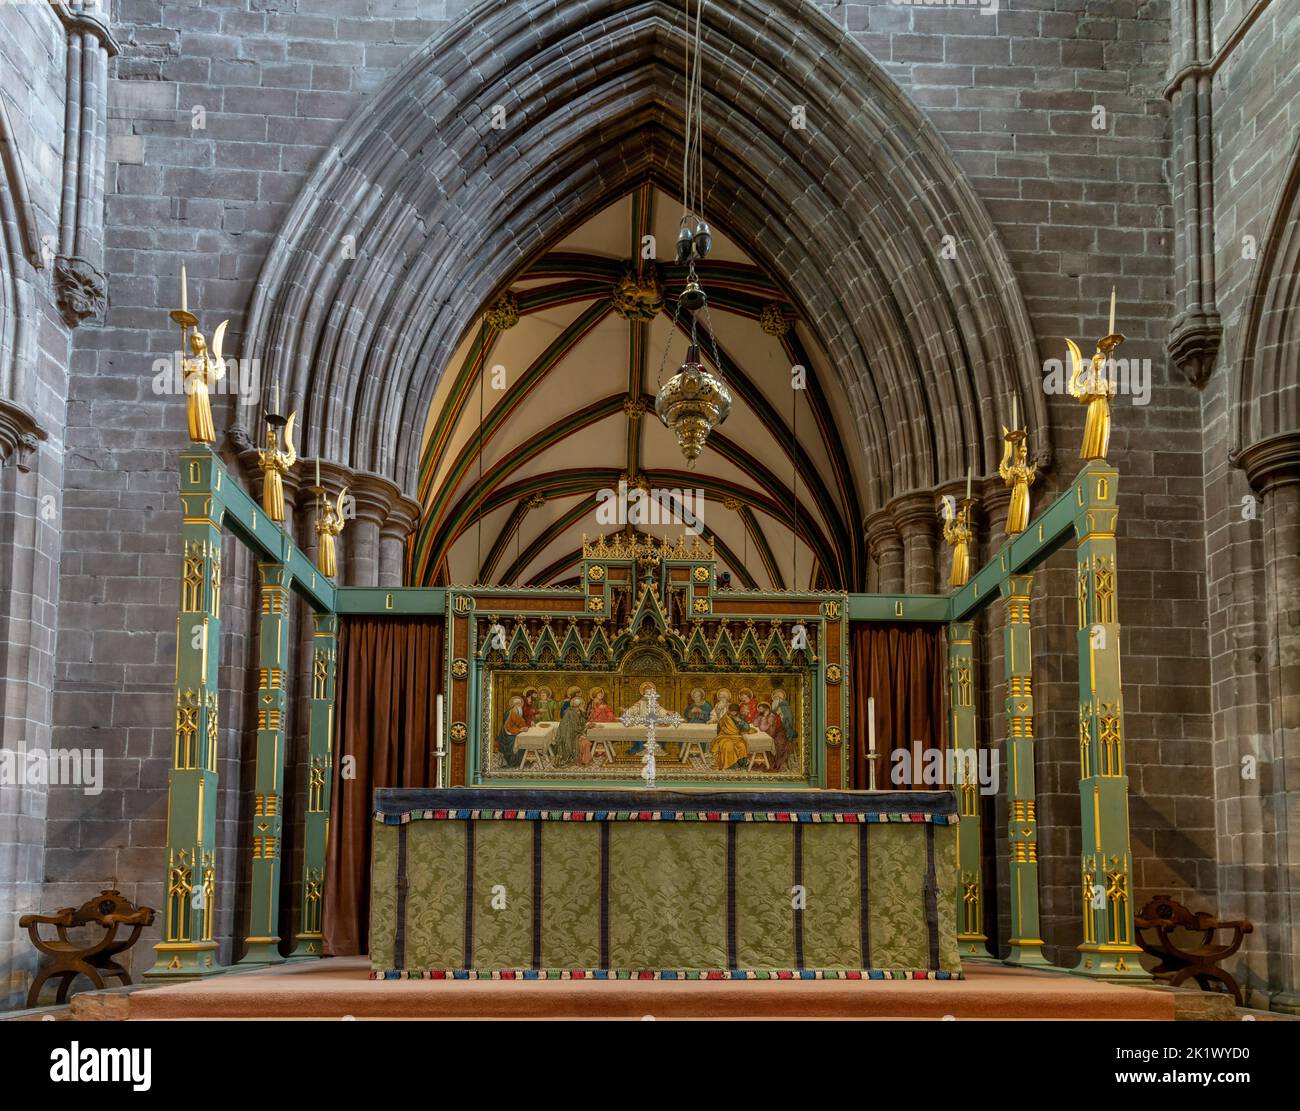 Chester, United Kingdom - 26 August, 2022: ornate gilded altar with the Last Supper painting inside the historic Chester Cathedral in Cheshire Stock Photo